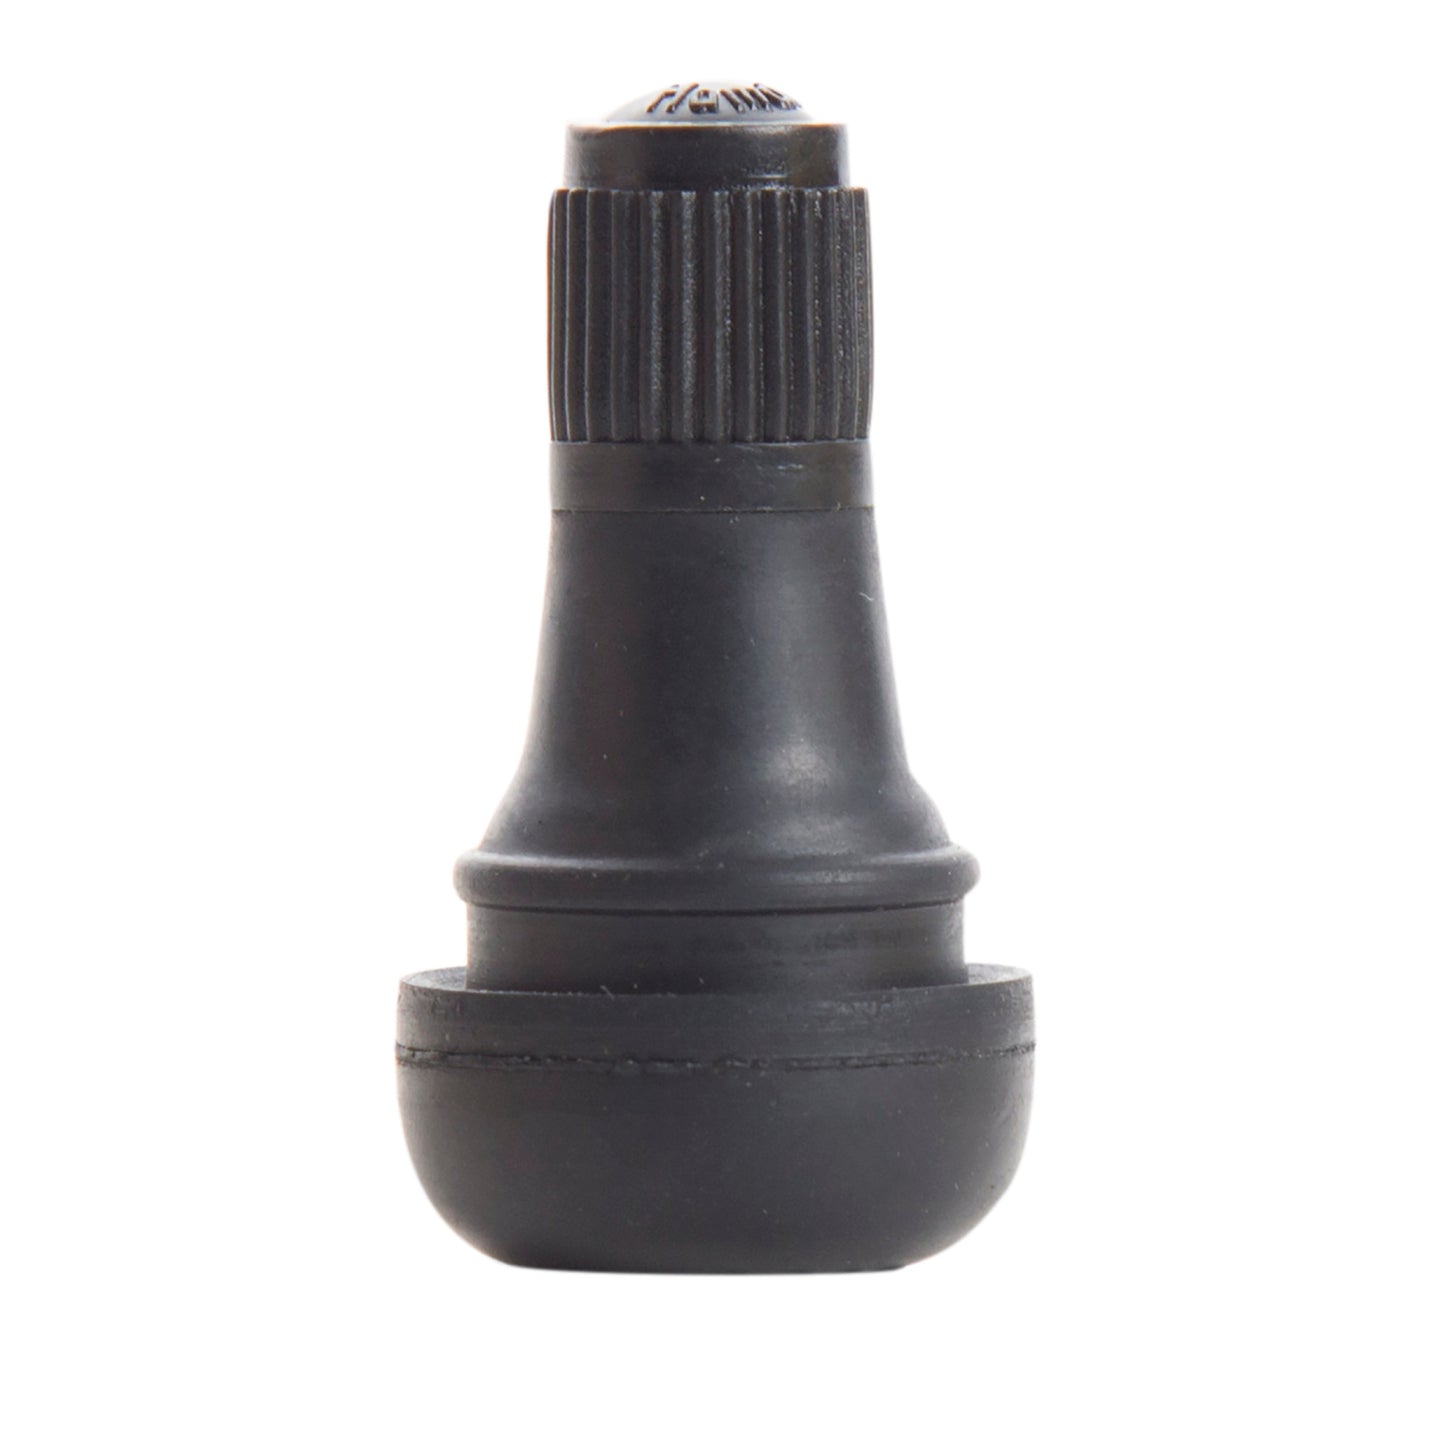 0.88-Inch TR412 Snap-in Rubber Valve Stem, Pack of 50